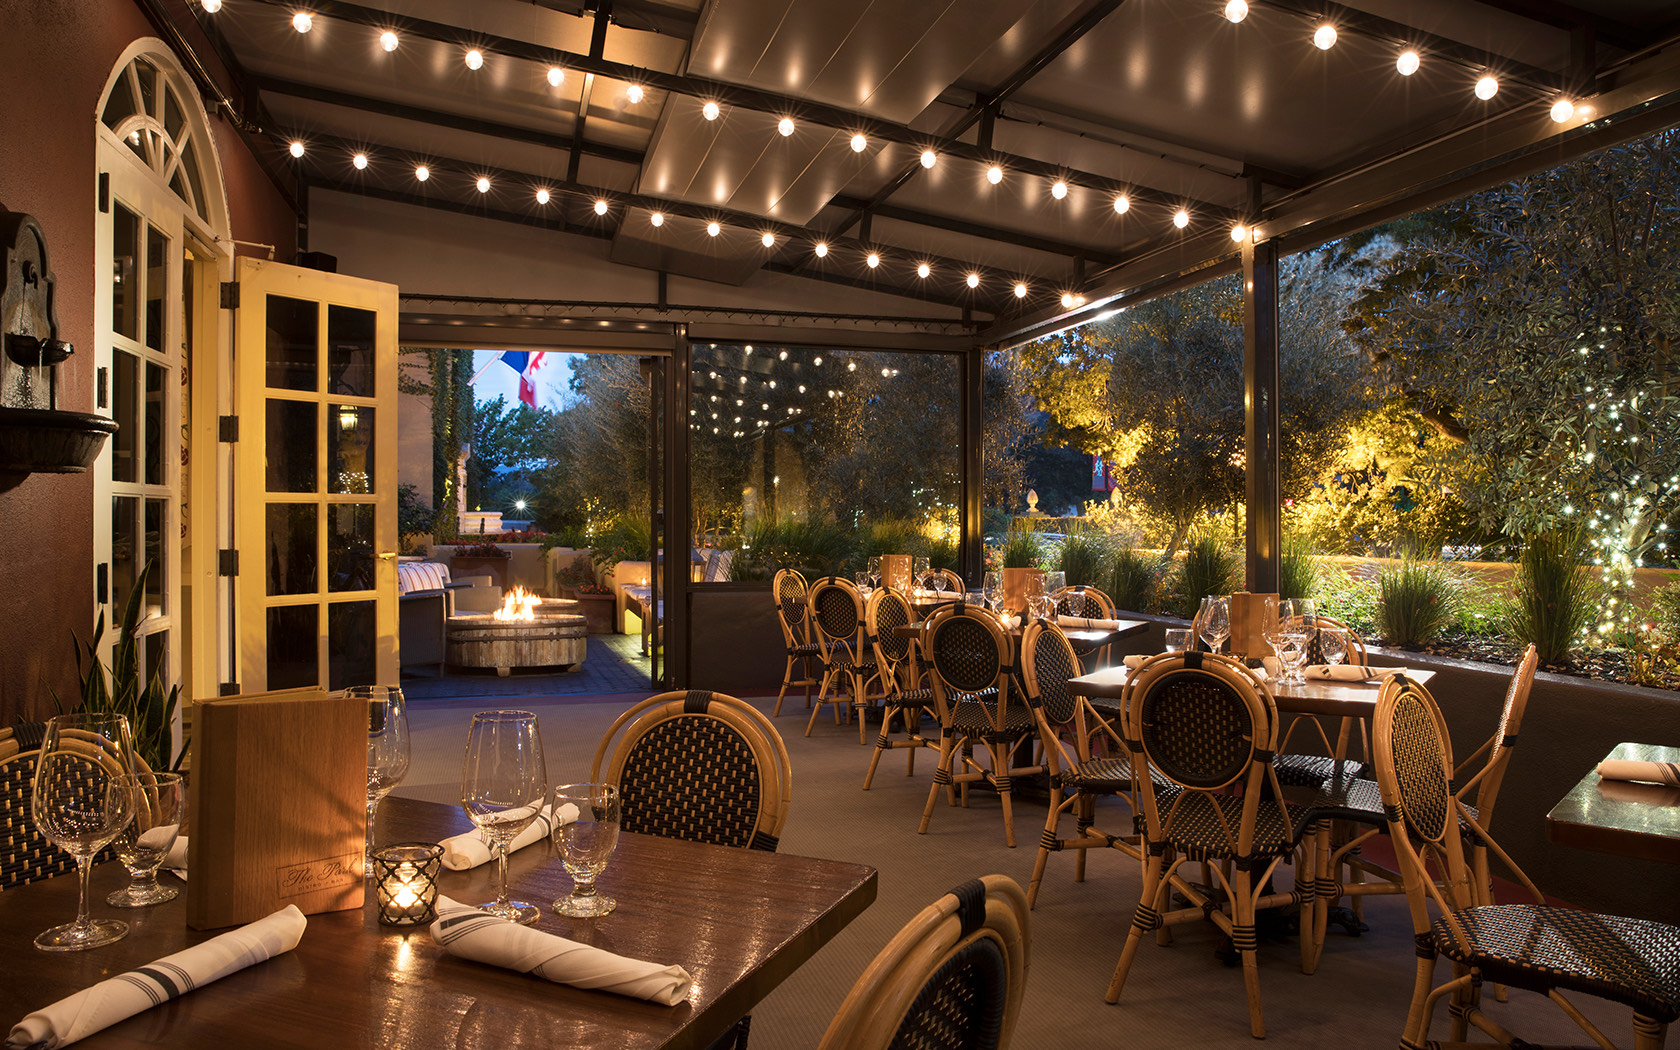 A sophisticated restaurant with romantic view at night